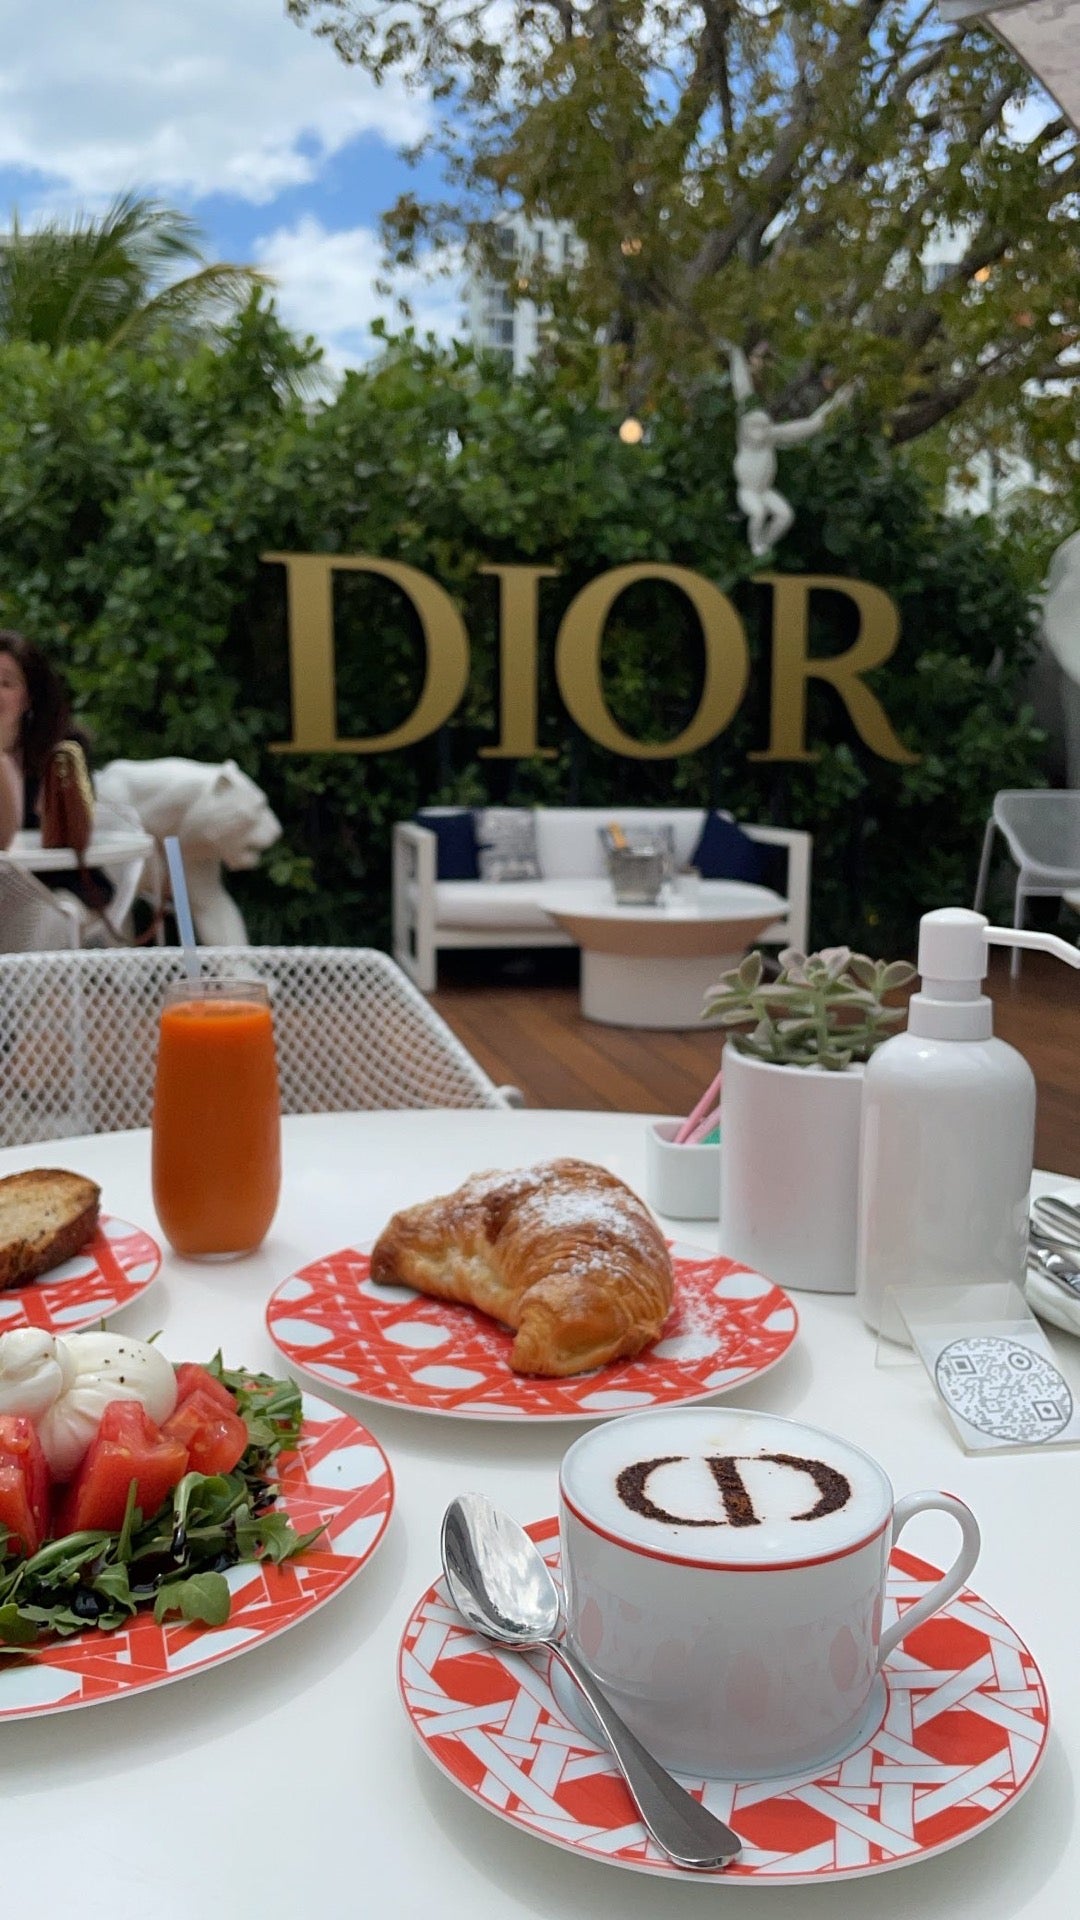 Dior Cafe Miami  Why its the place to be seen right now  Christinabtv